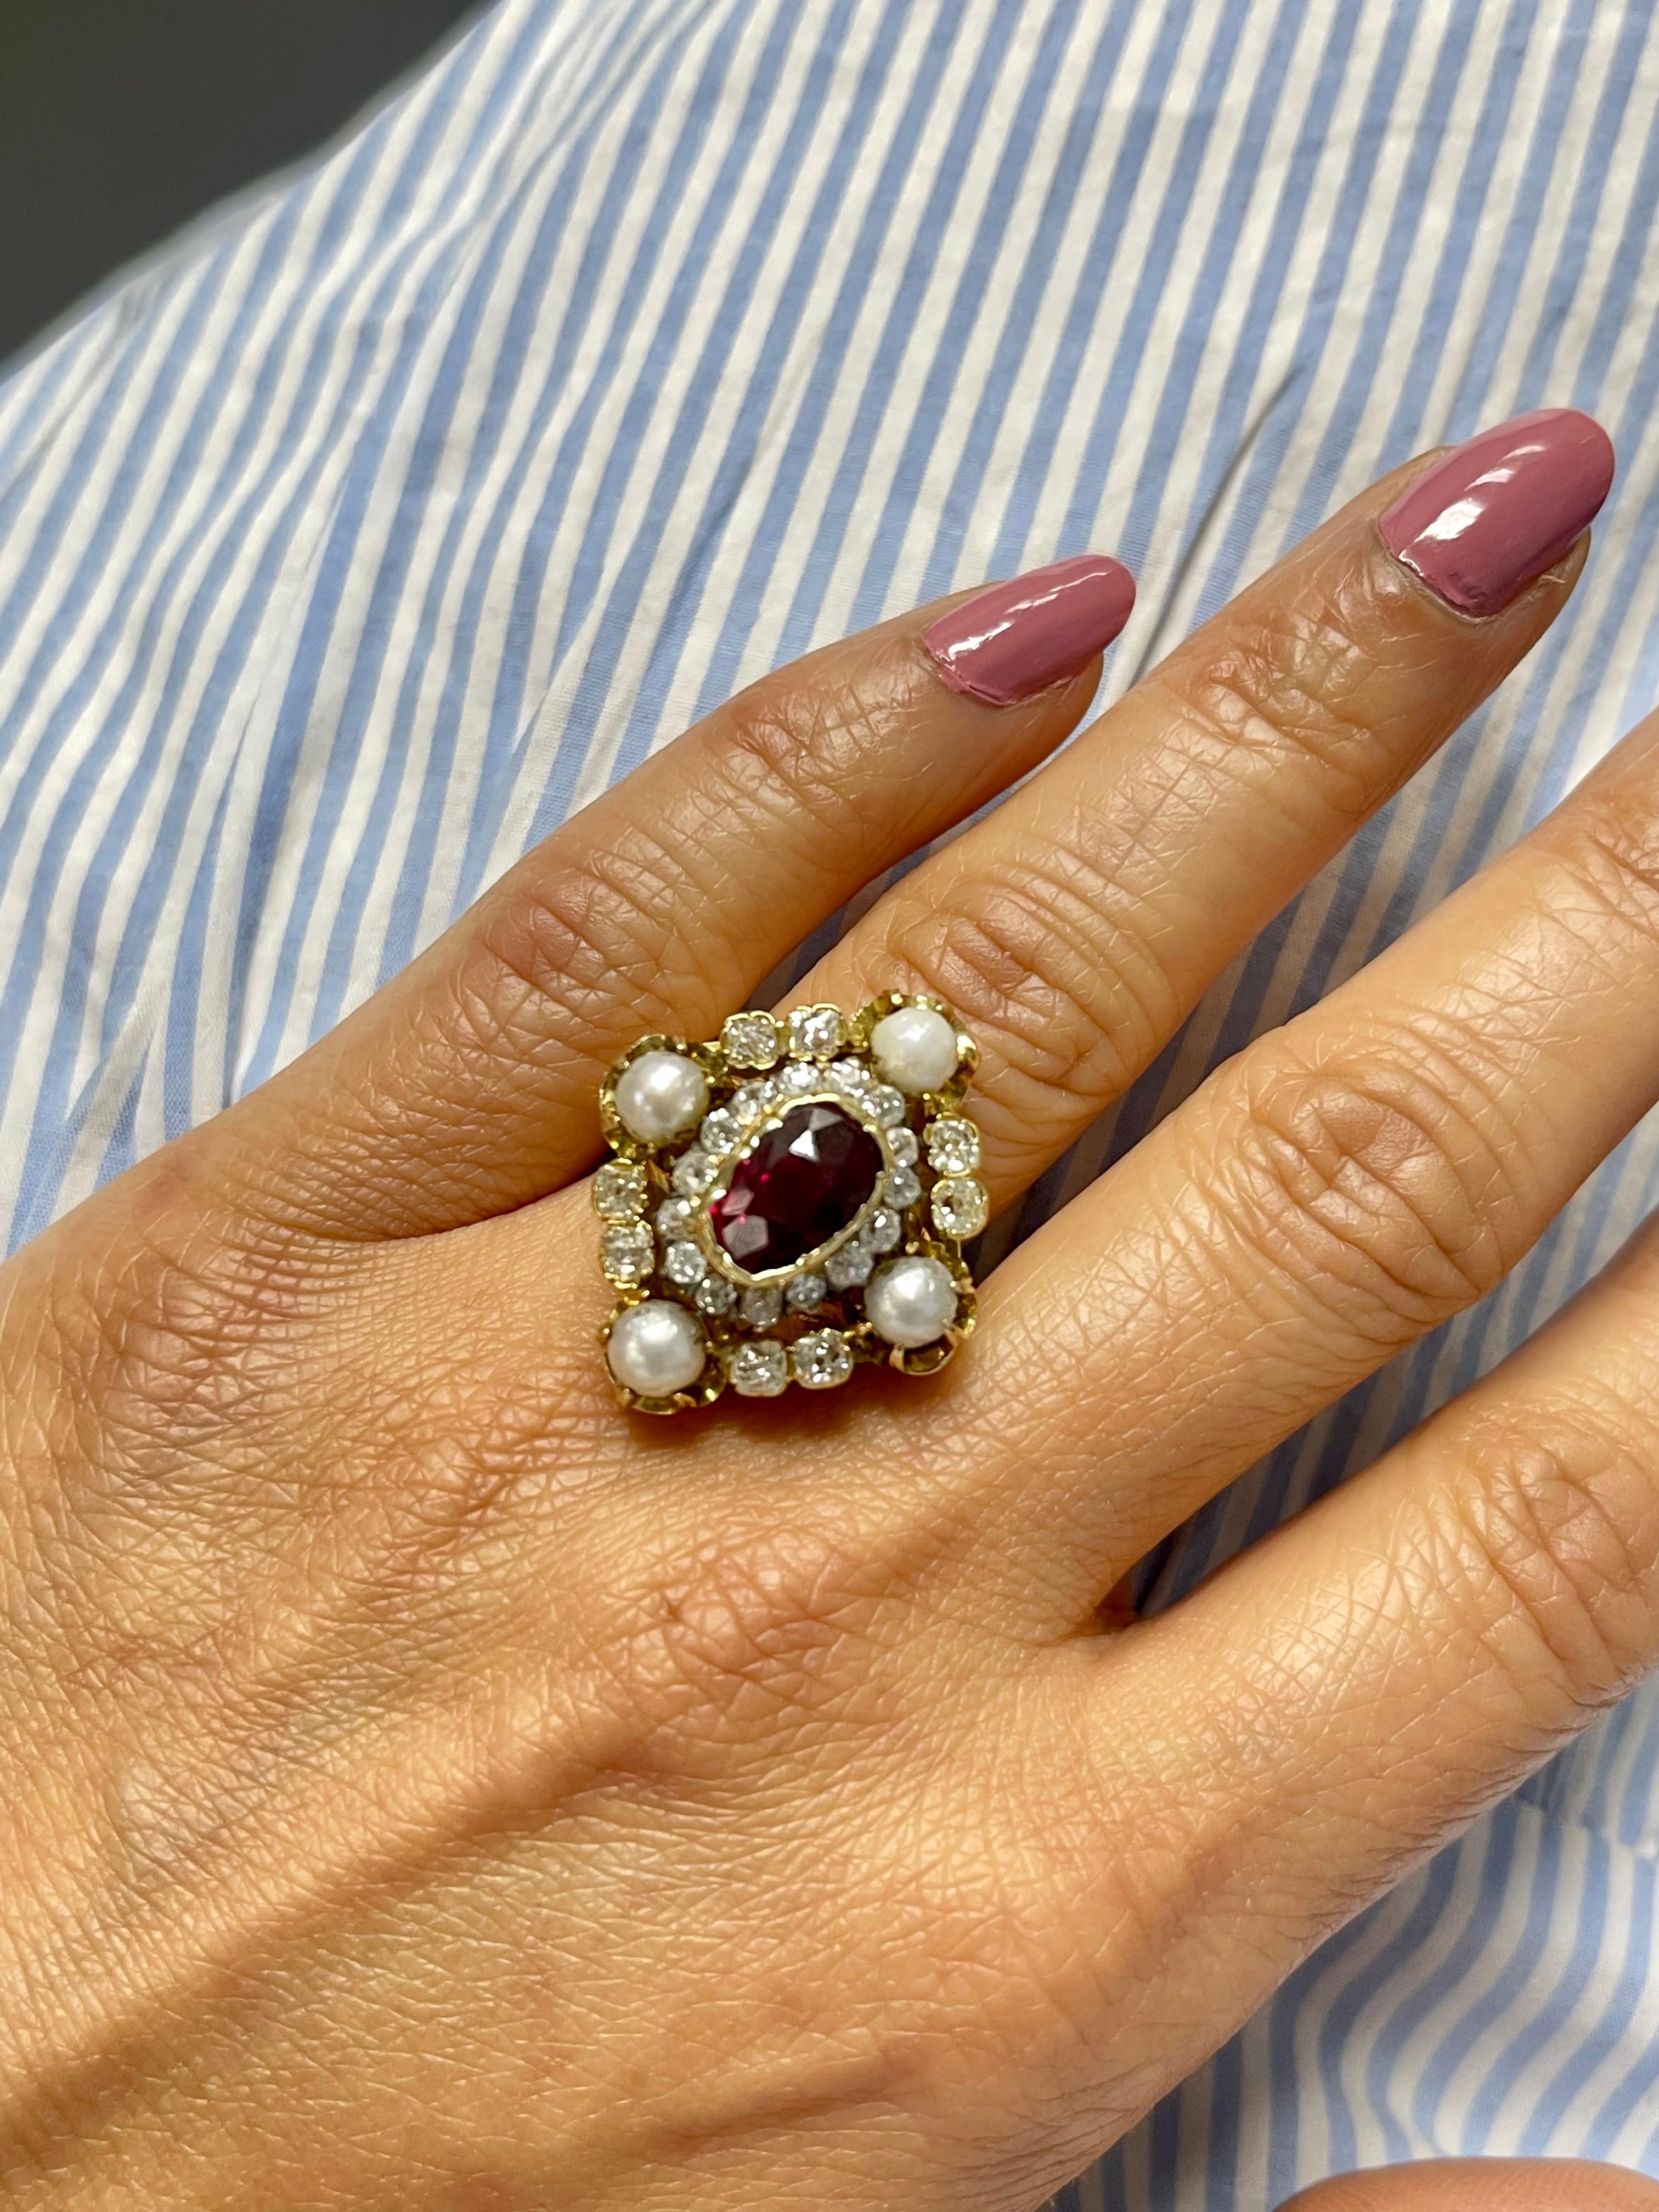 Women's GRS Certified Vintage Thai Ruby, Pearl and Diamond Ring in 18k Yellow Gold For Sale